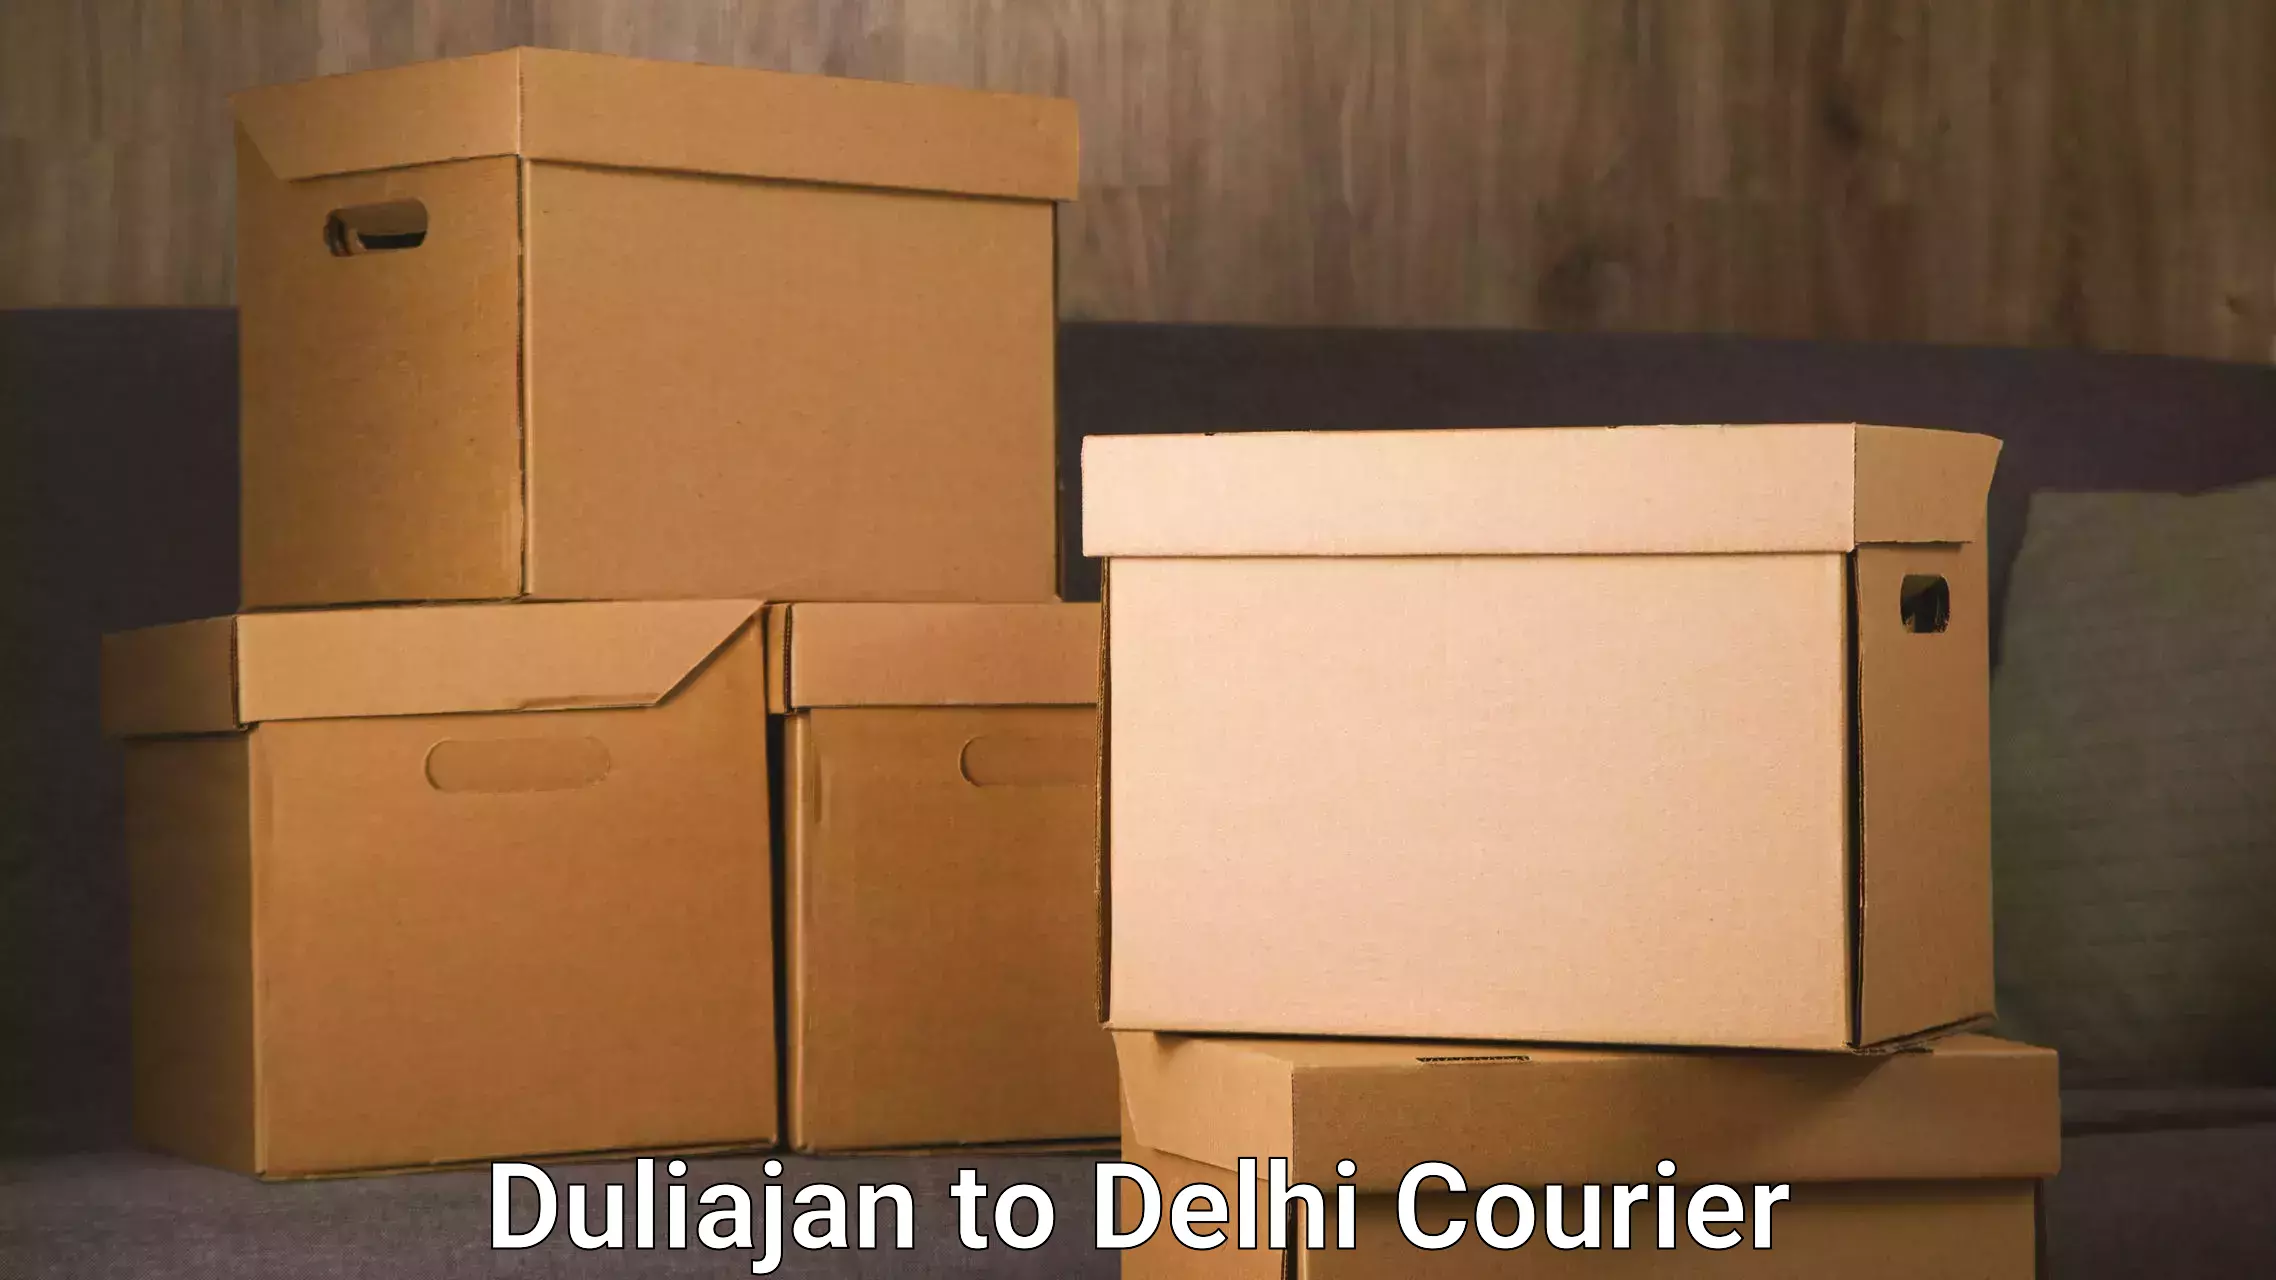 Enhanced tracking features in Duliajan to Delhi